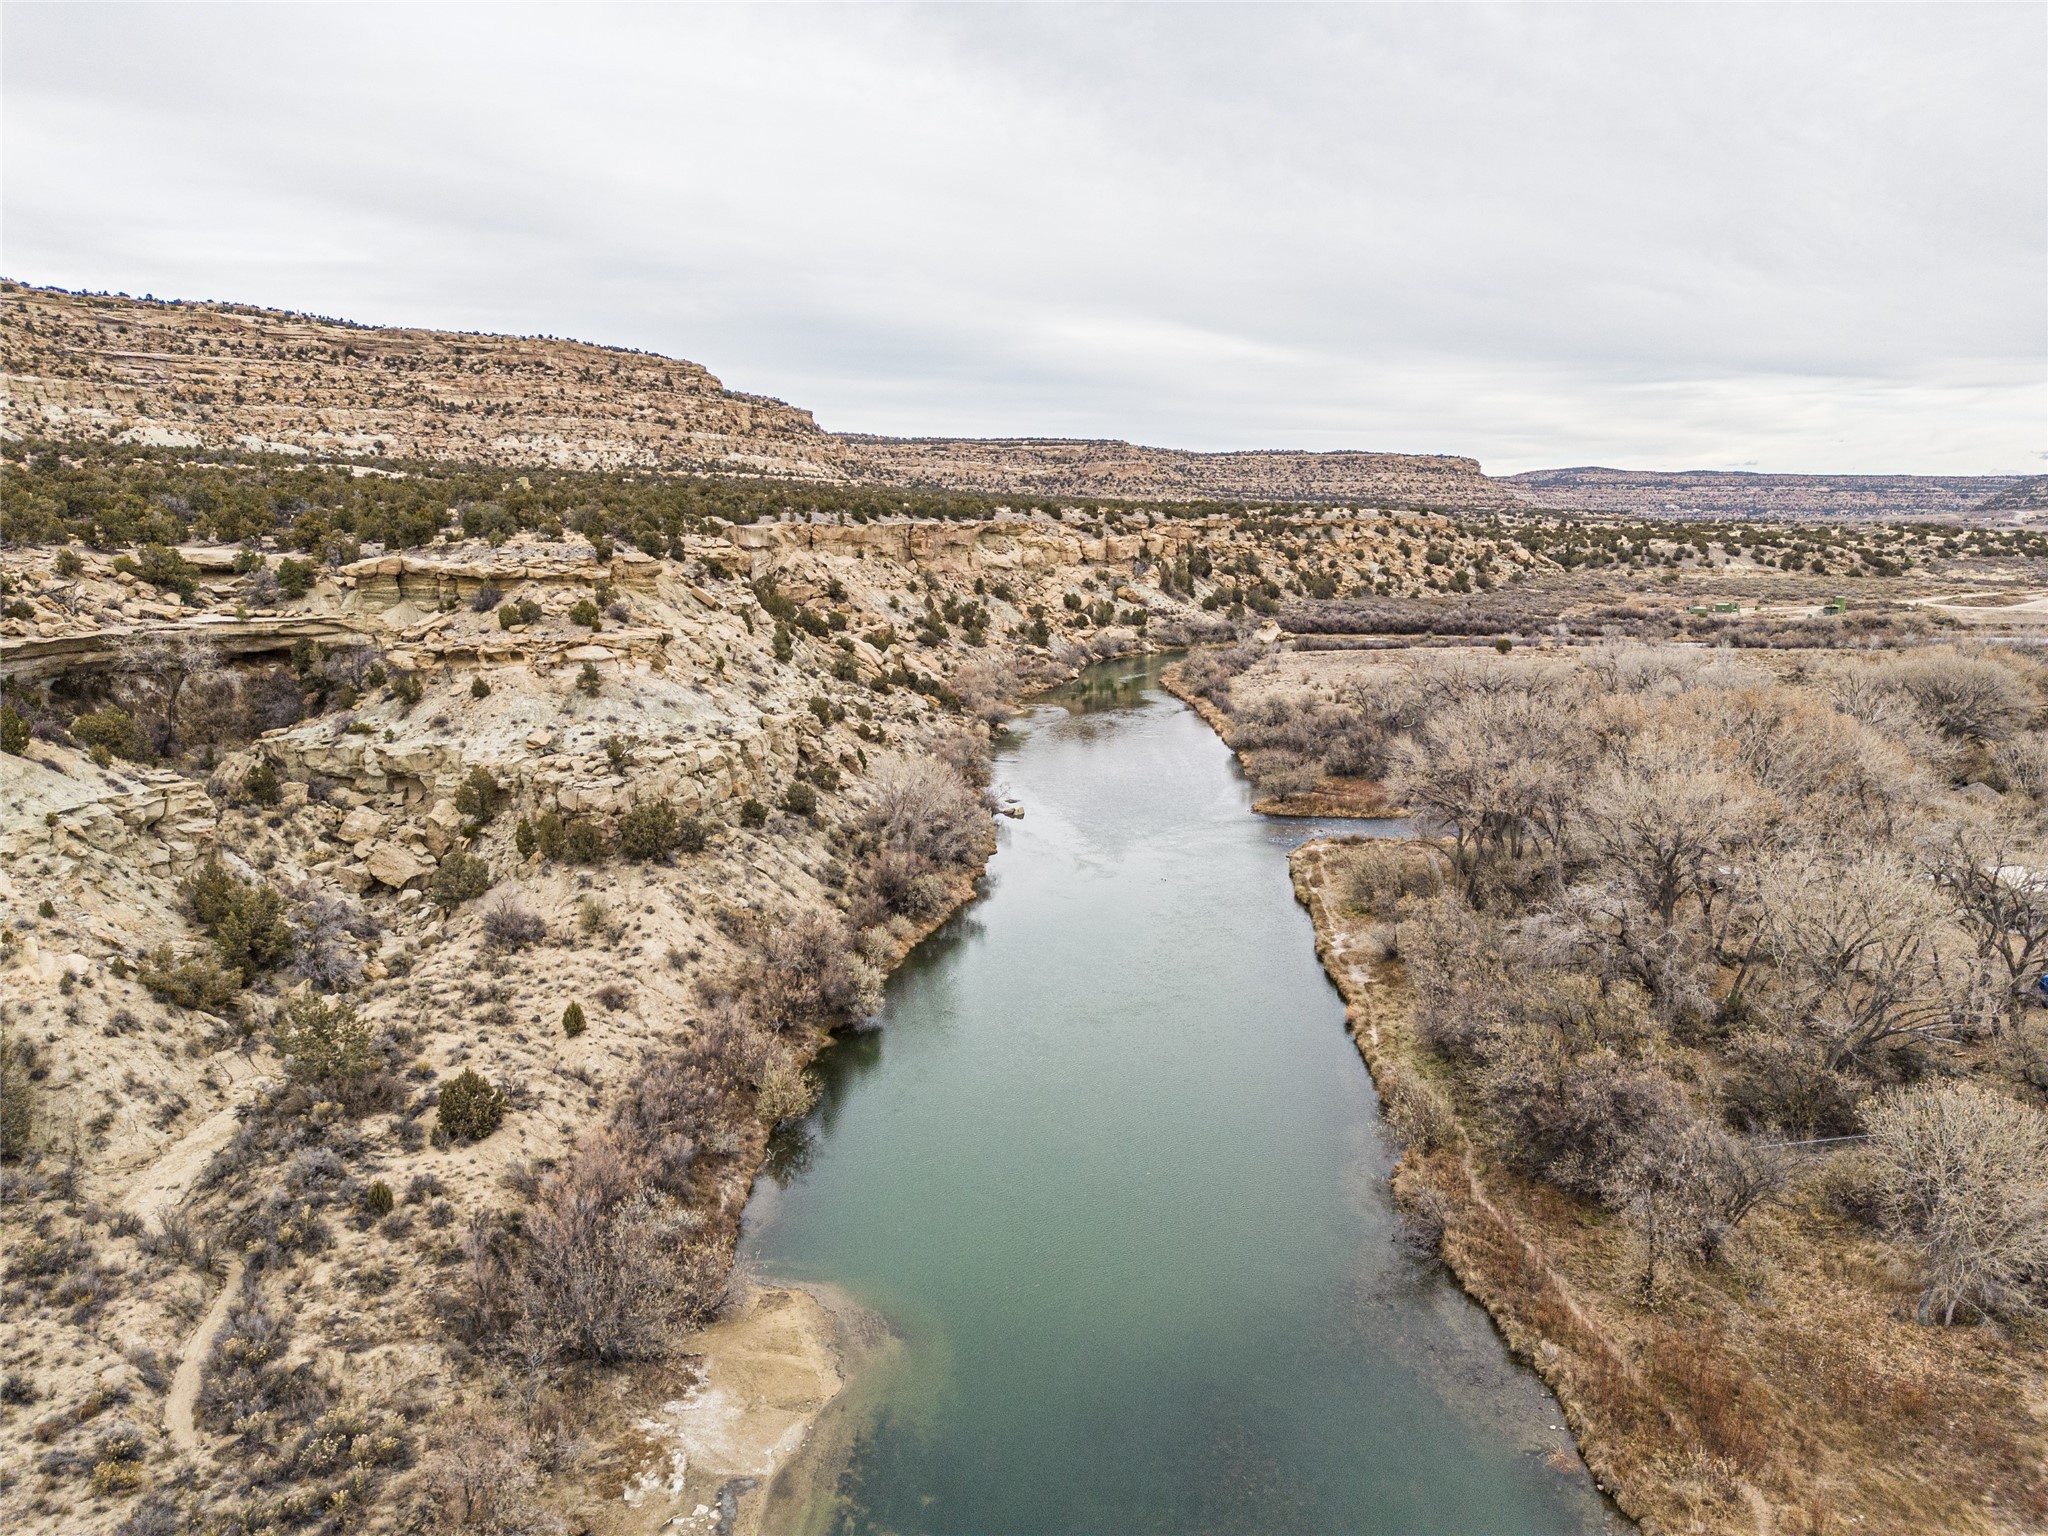 1791 NM-173 Aztec Highway, Navajo Dam, New Mexico 87419, ,Commercial Sale,For Sale,1791 NM-173 Aztec Highway,202340273